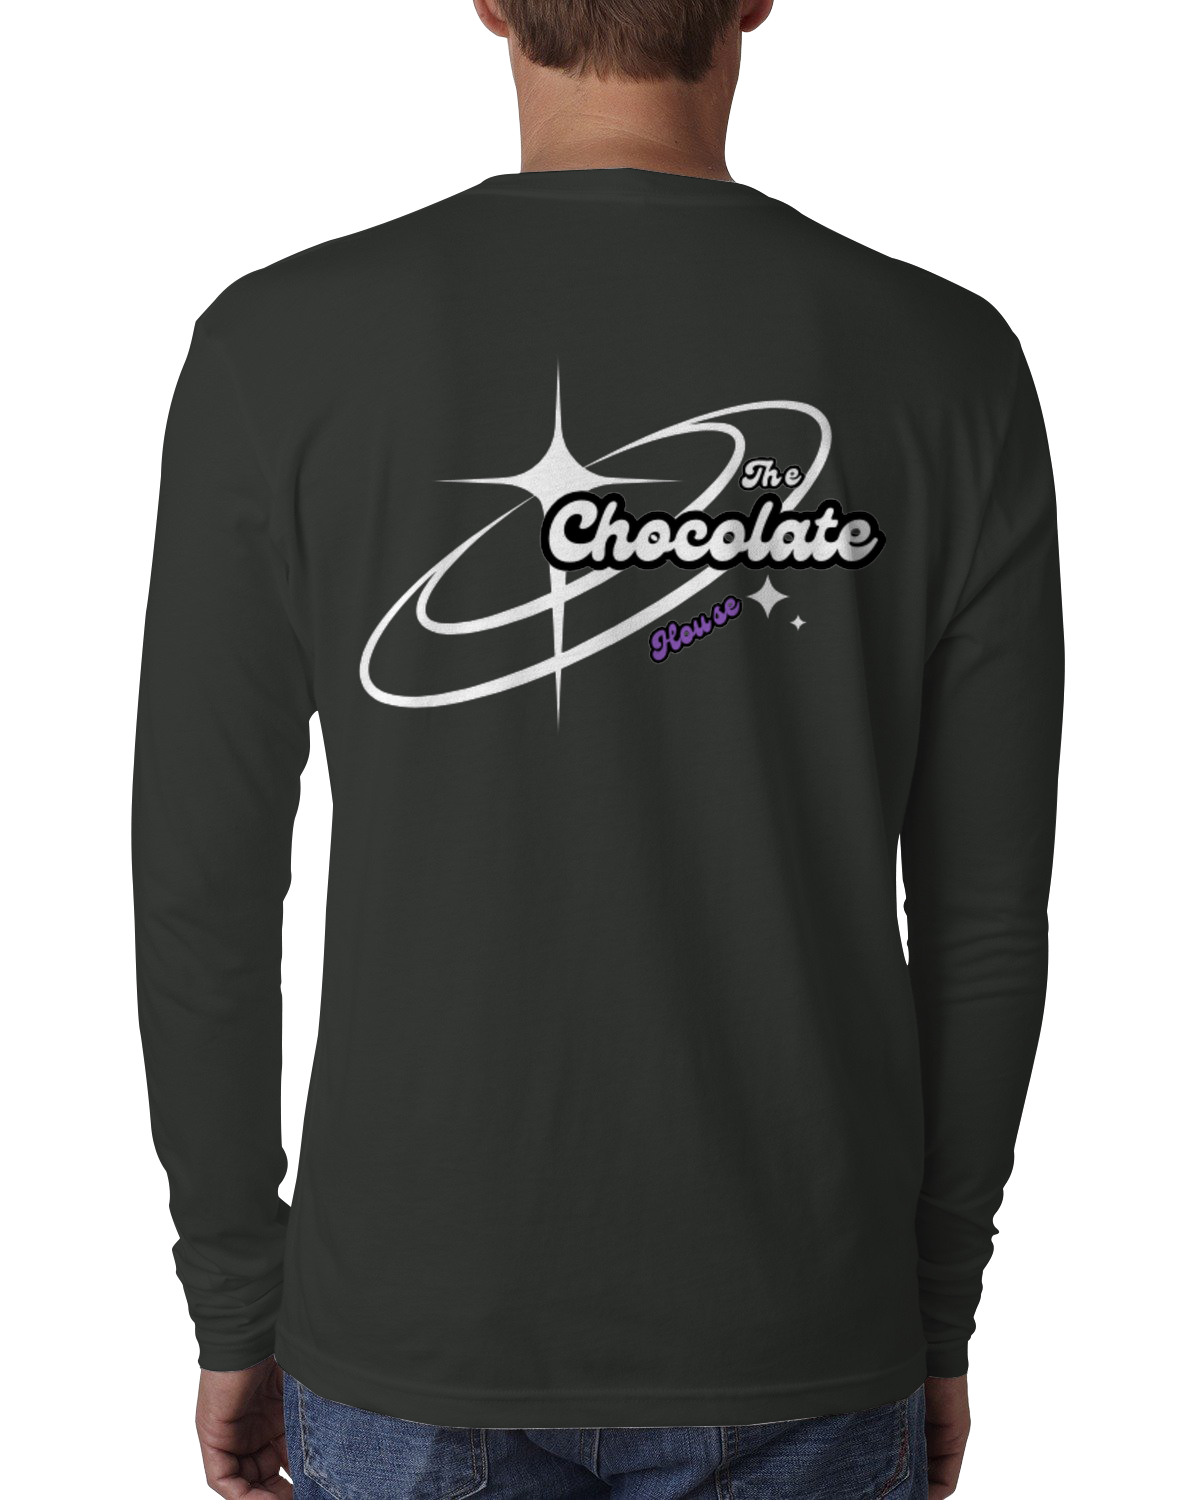 The Chocolate House (Unisex Luxury Fitted Long Sleeve Tee)